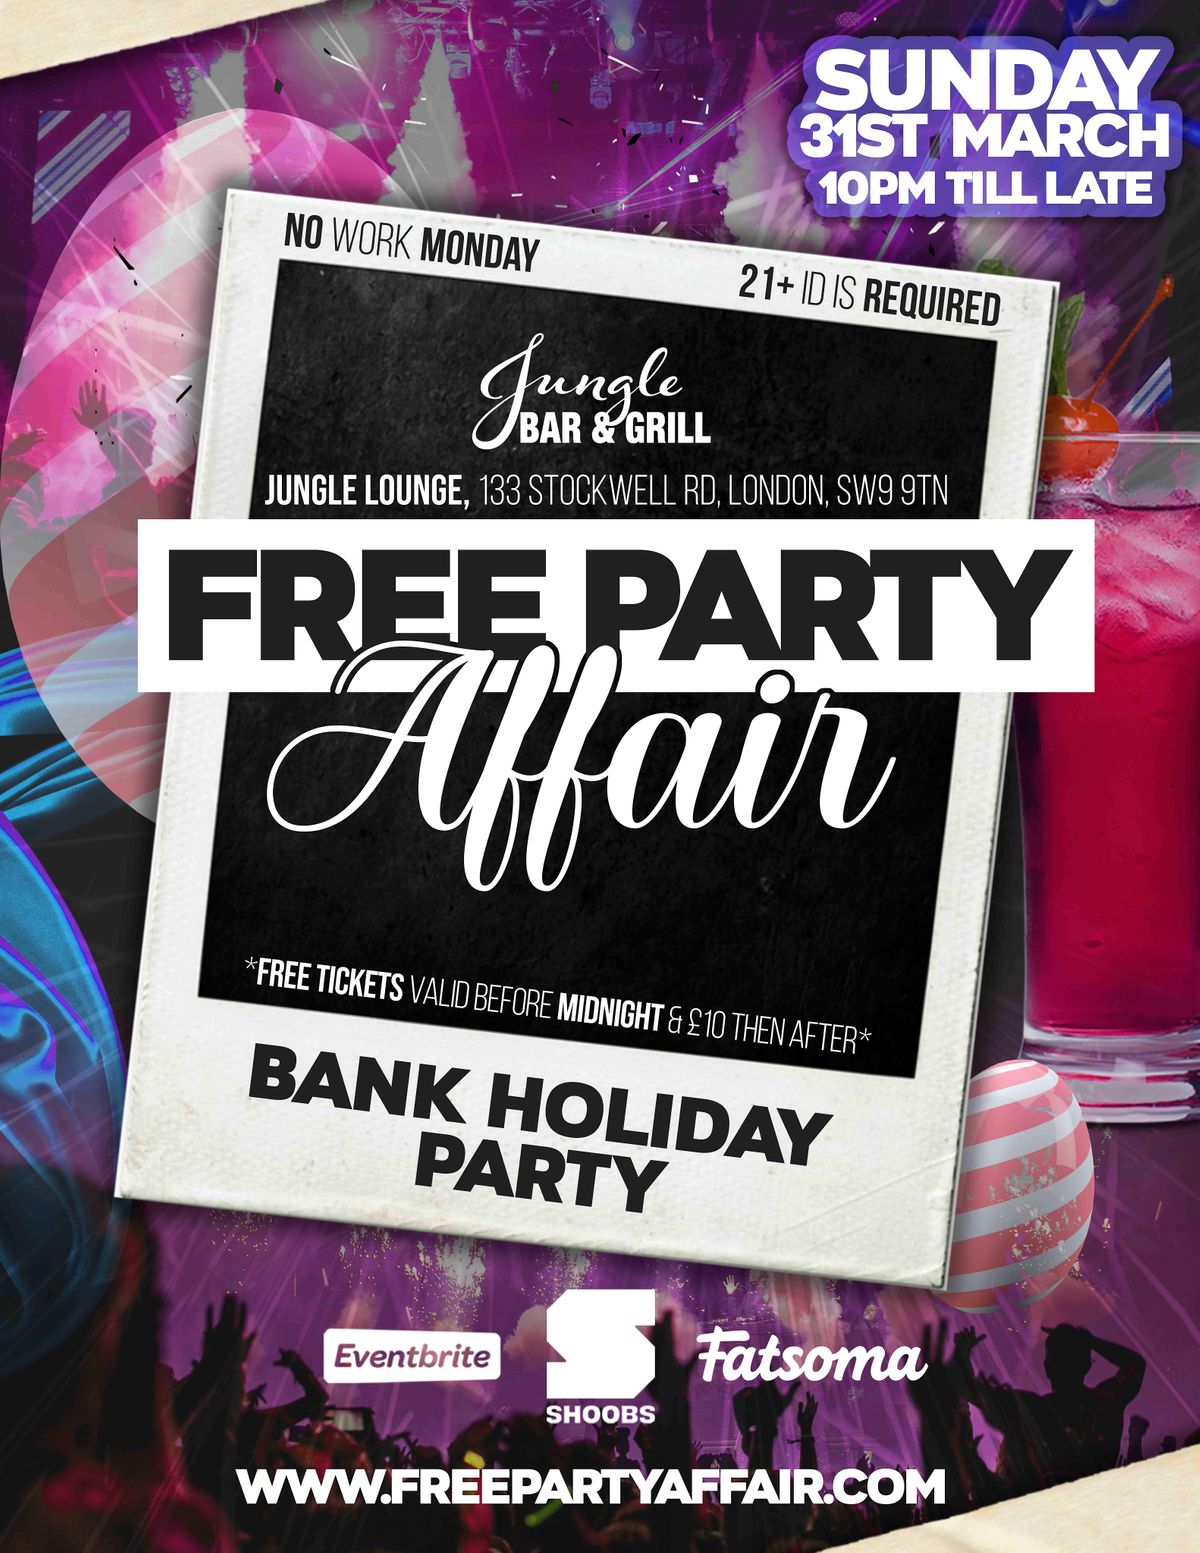 FREE PARTY AFFAIR ( BANK HOLIDAY PARTY )